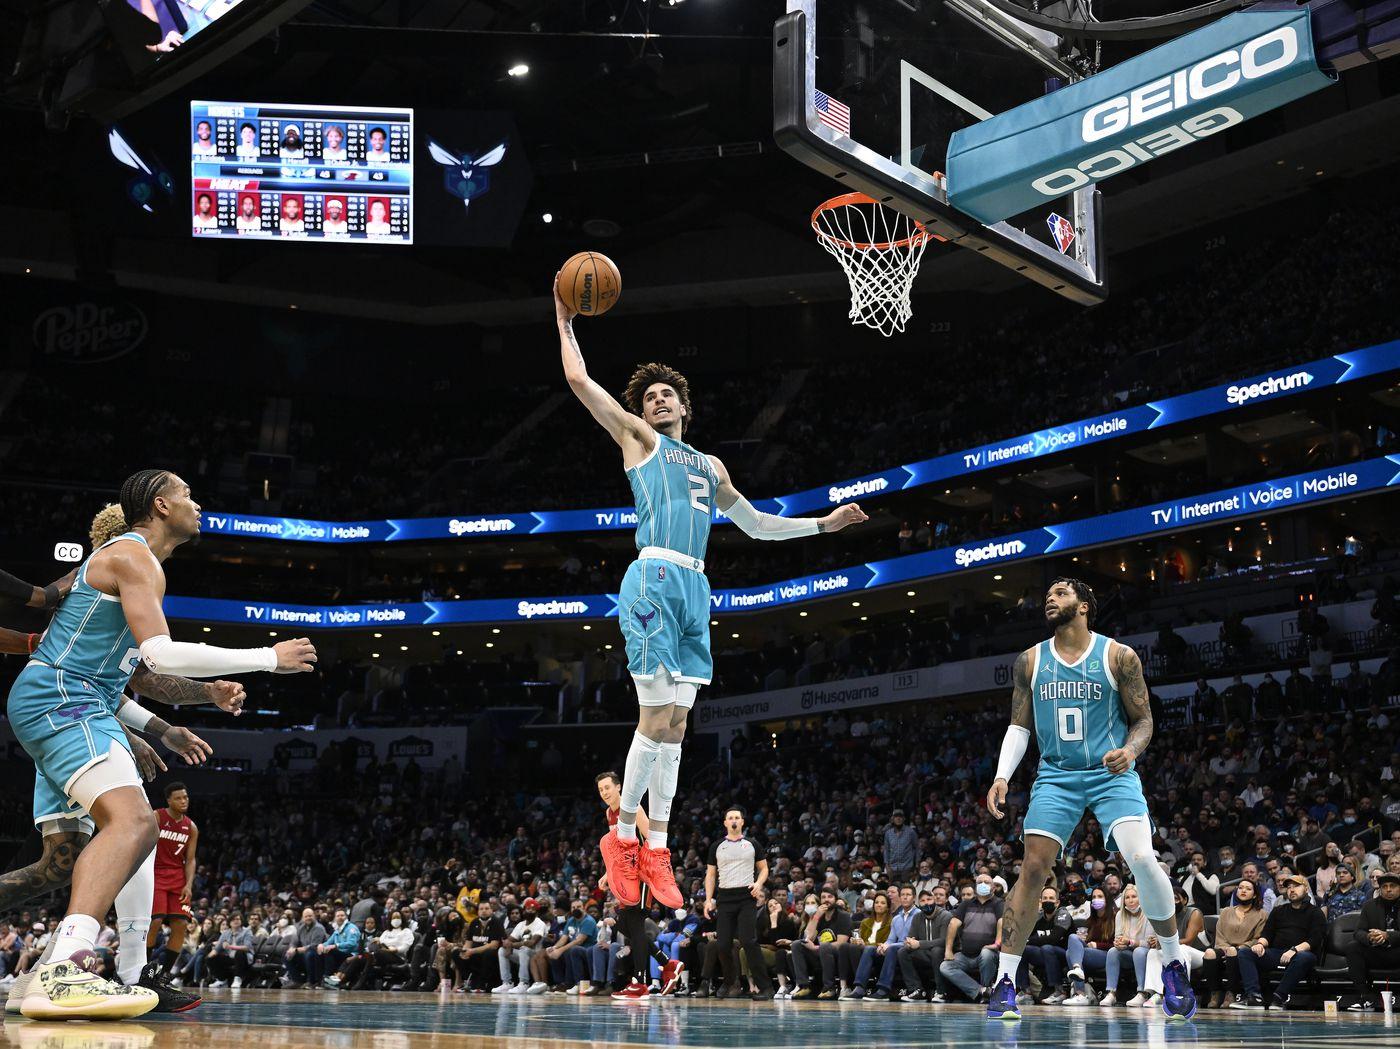 Nba All Star Game Mvp Odds Lamelo Ball To Win Award In